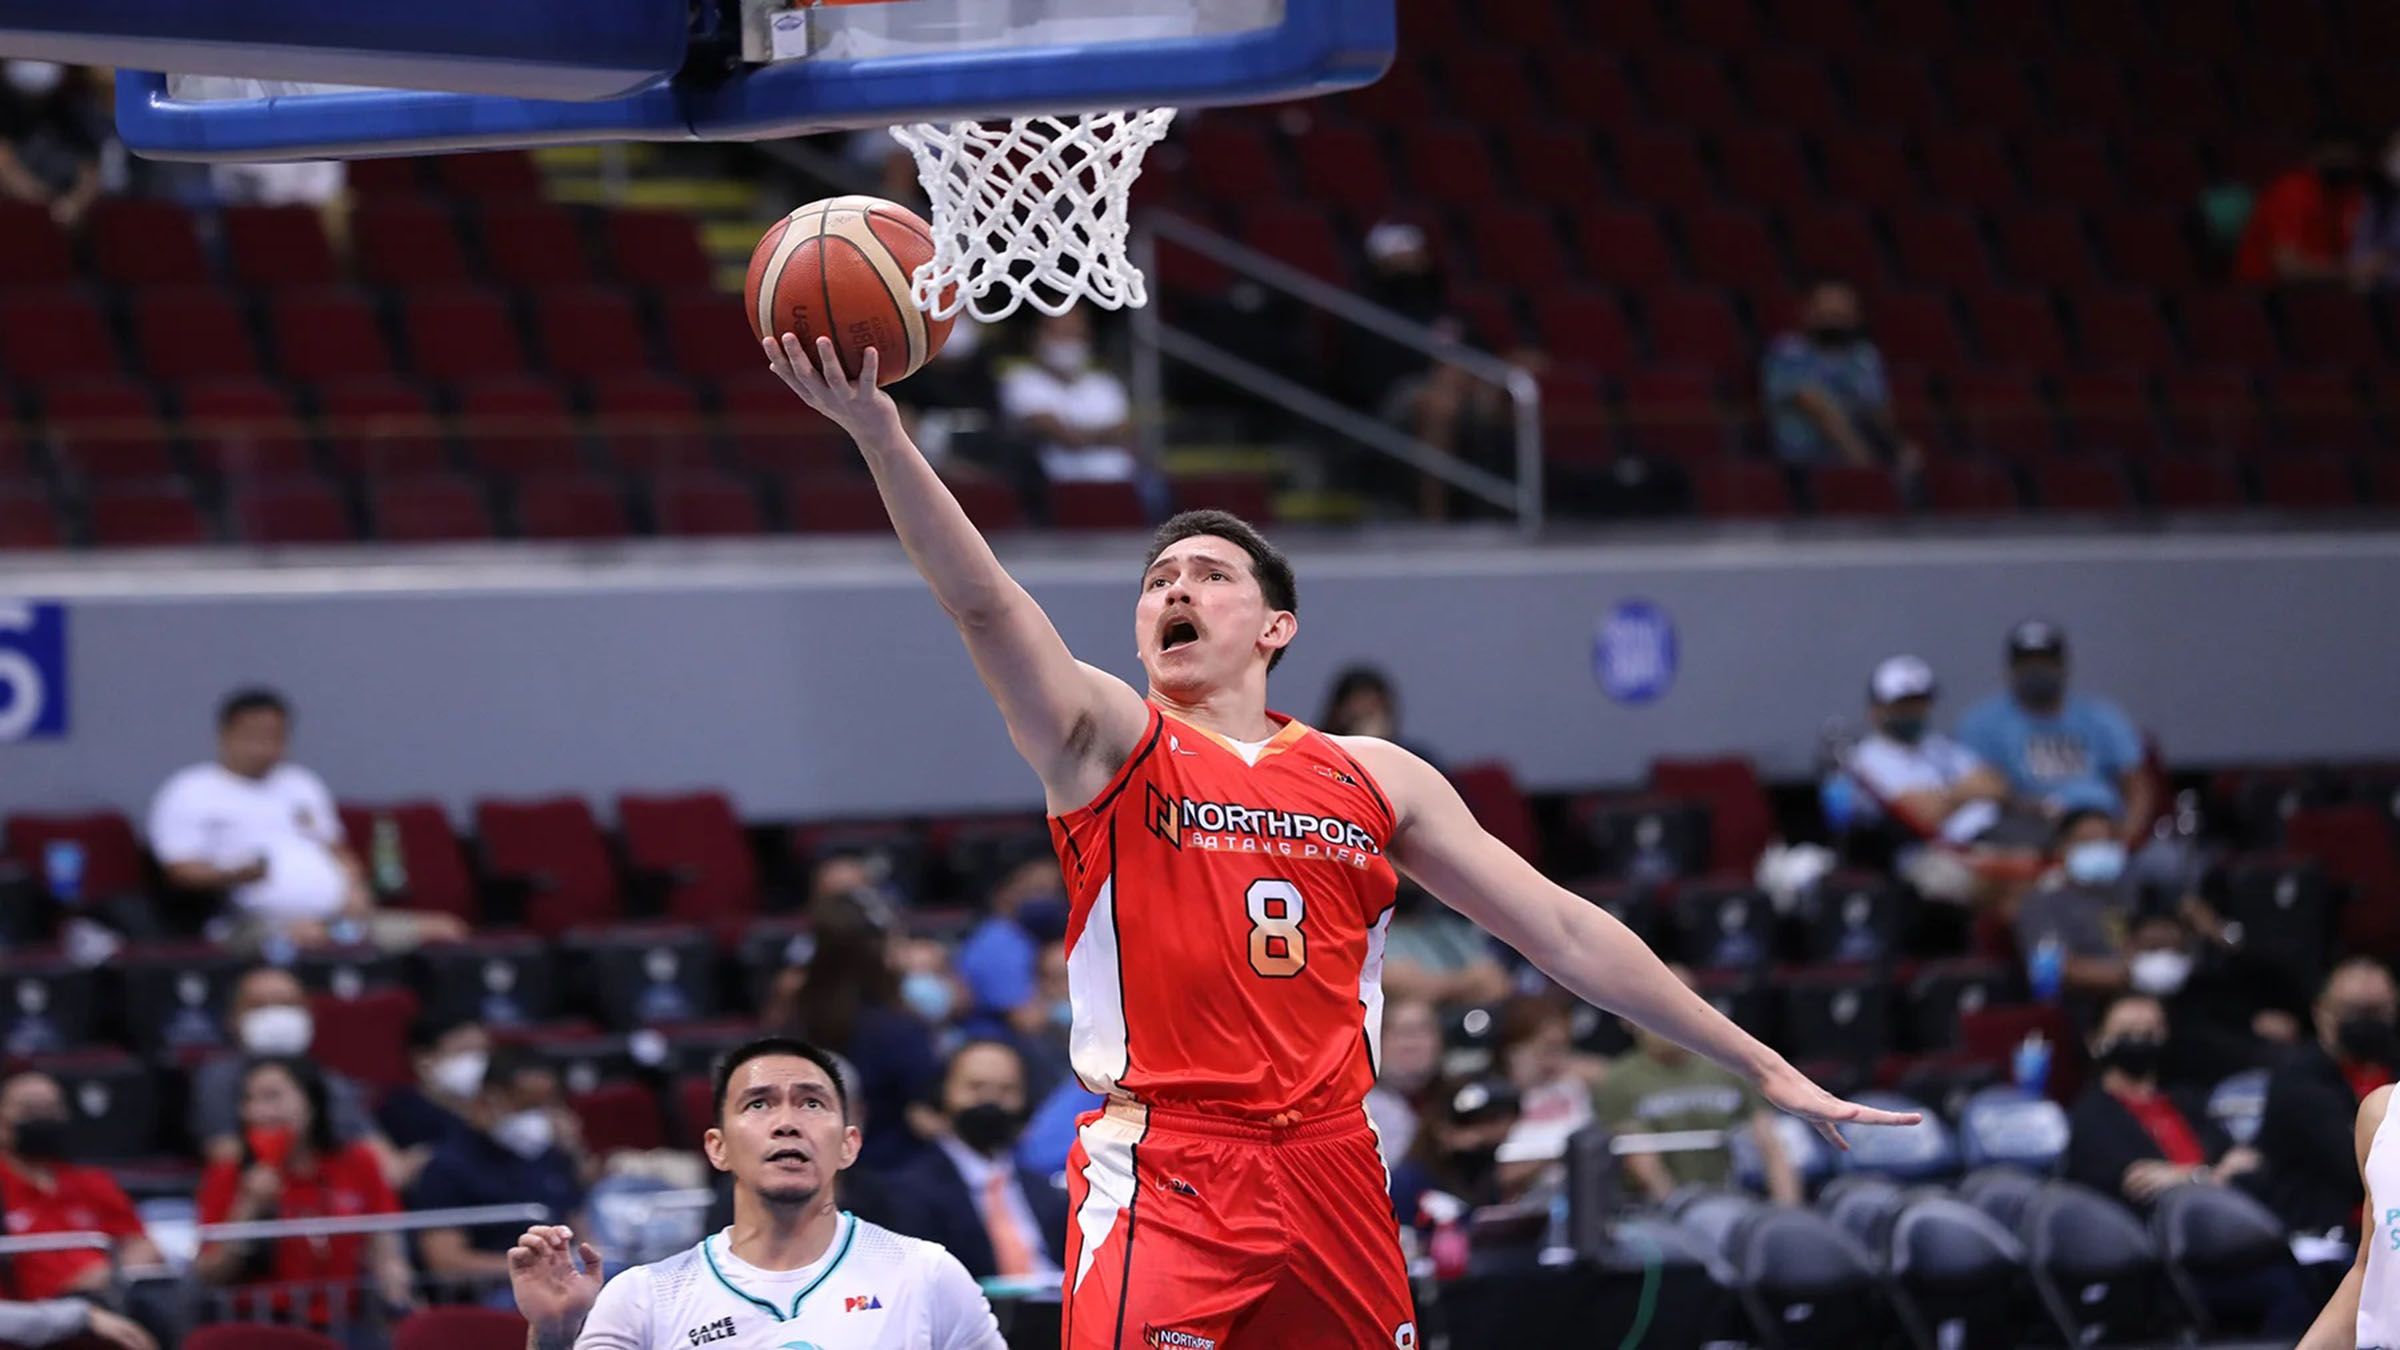 NorthPort gets Robert Bolick  for a one-conference deal